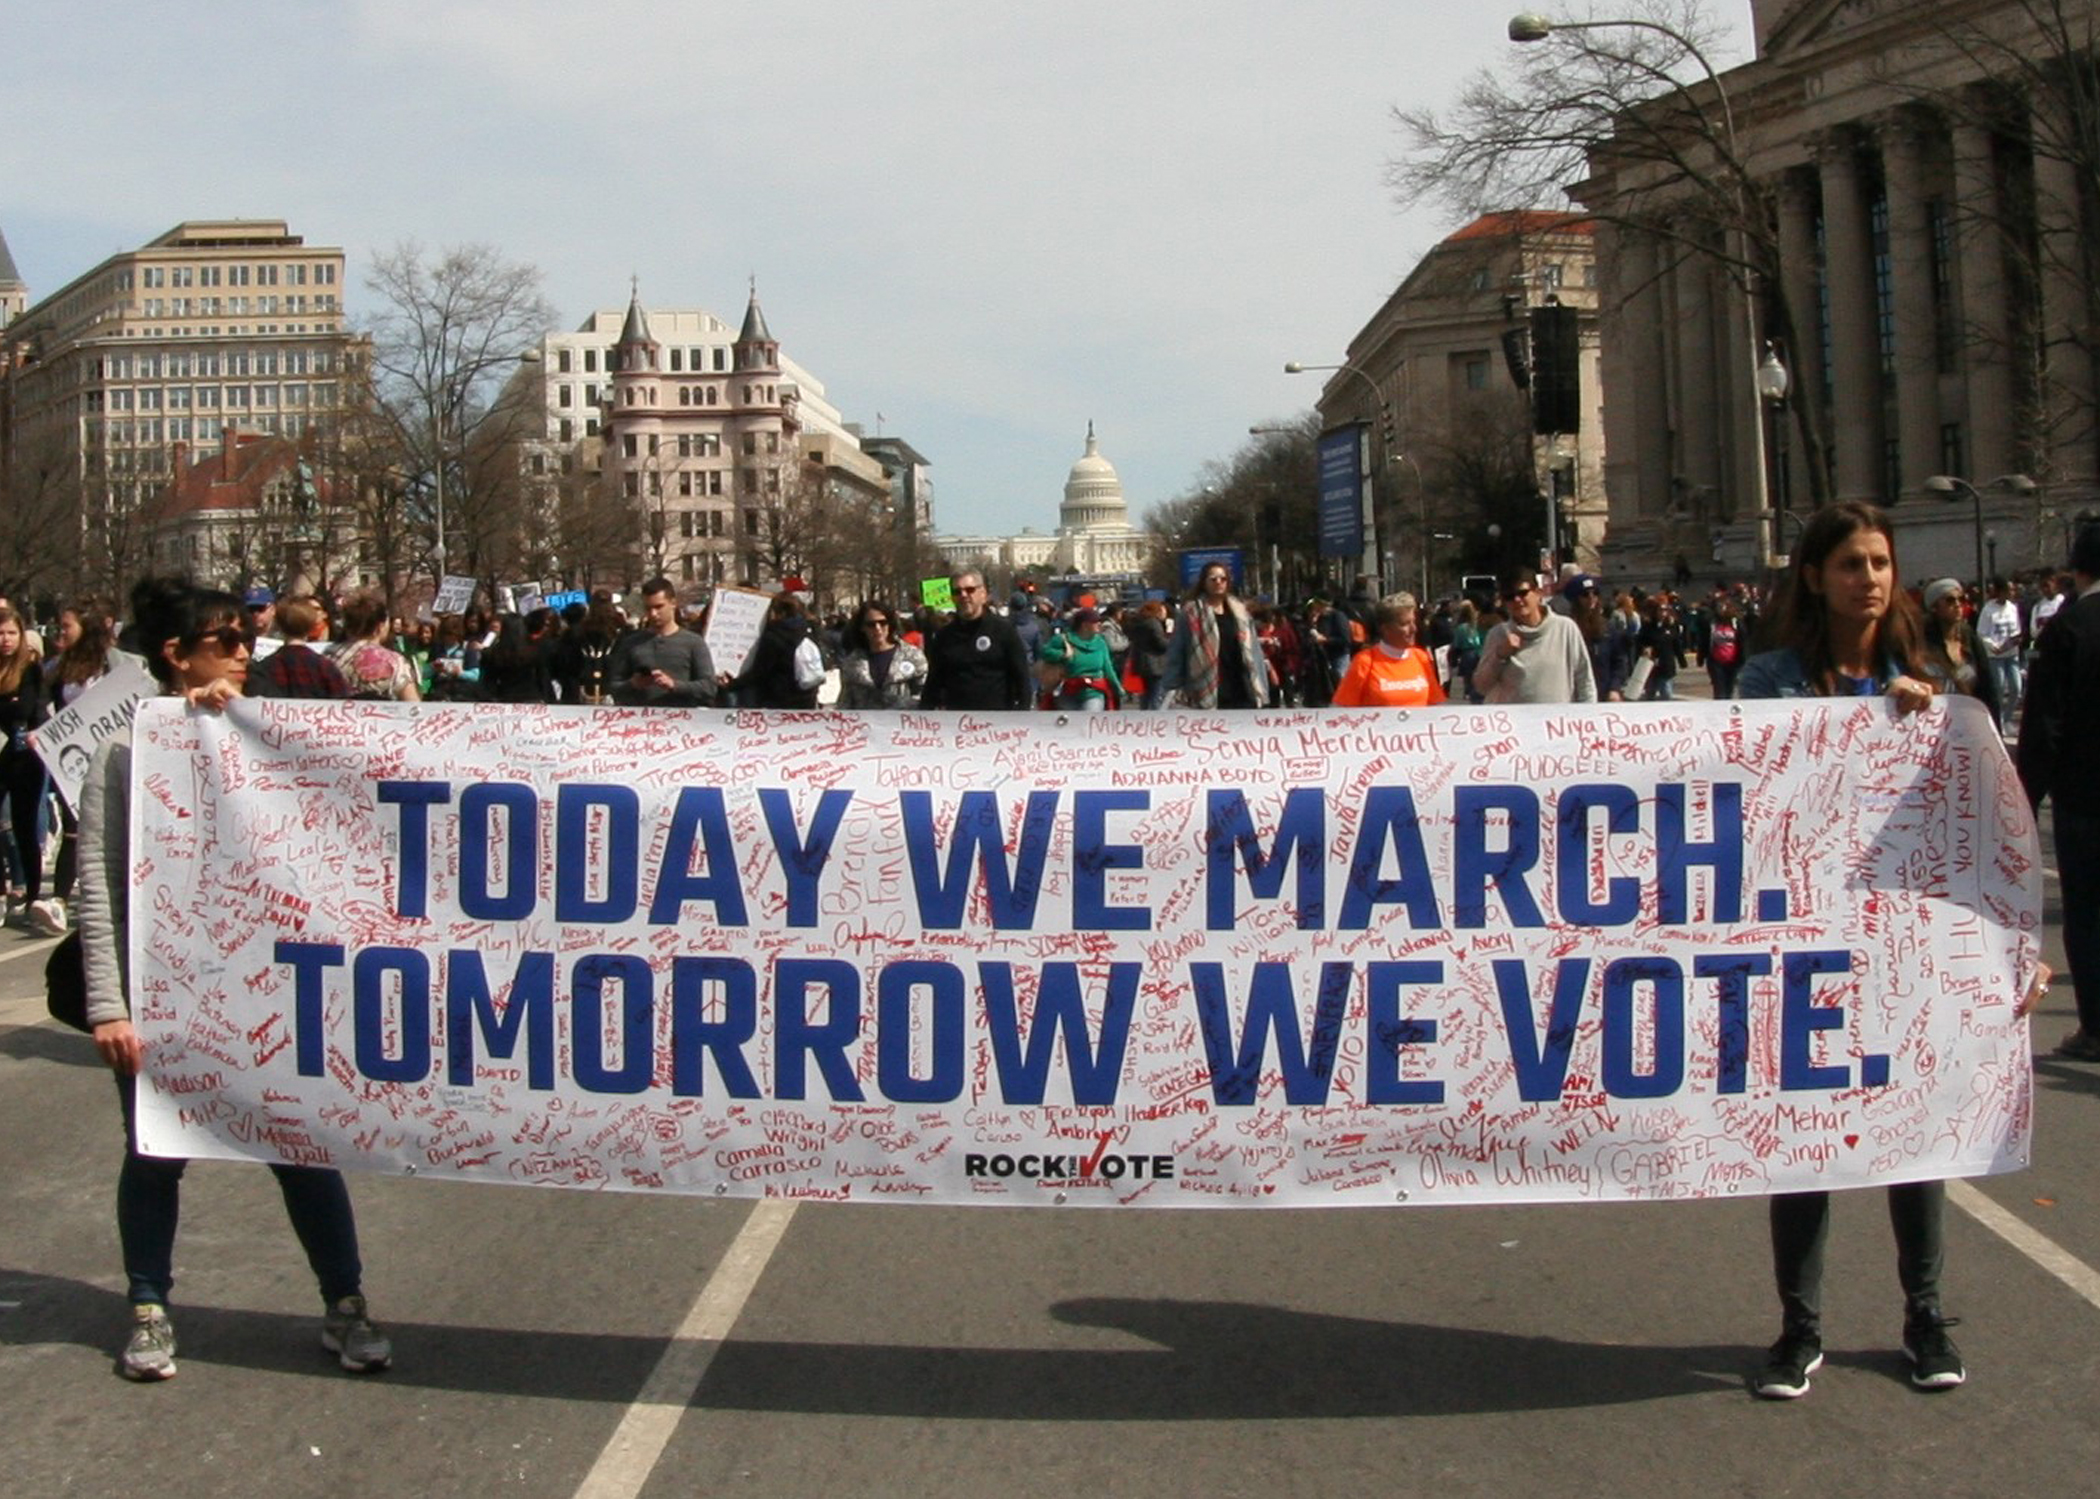 People holding a "Today We March, Tomorrow We Vote" banner during March for Our Lives rally in DC